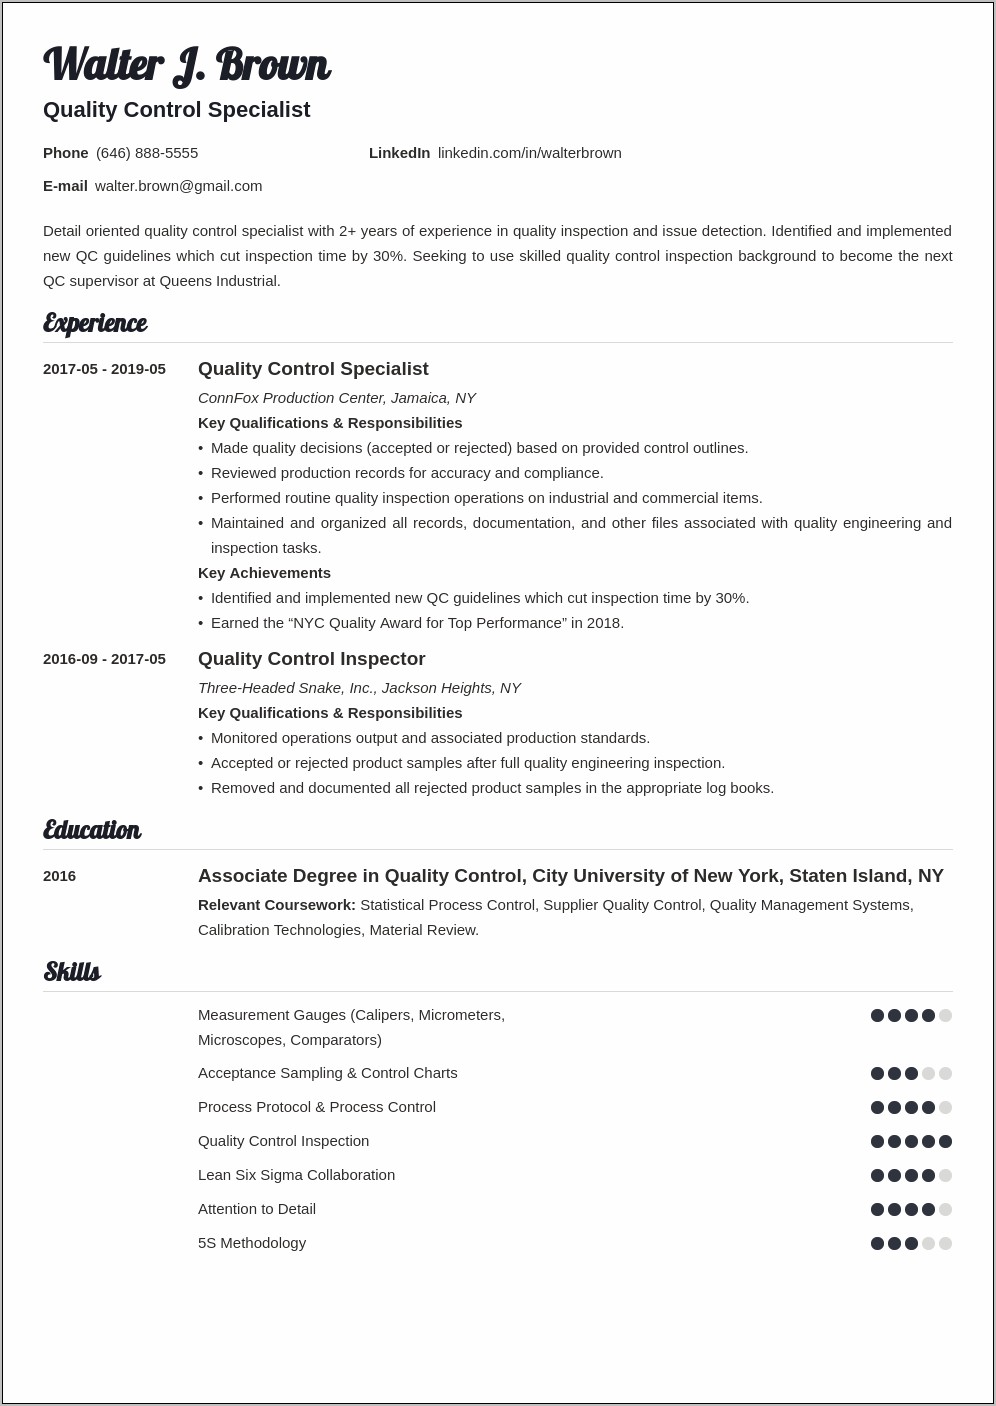 Examples Of Skills In Quality Resumes